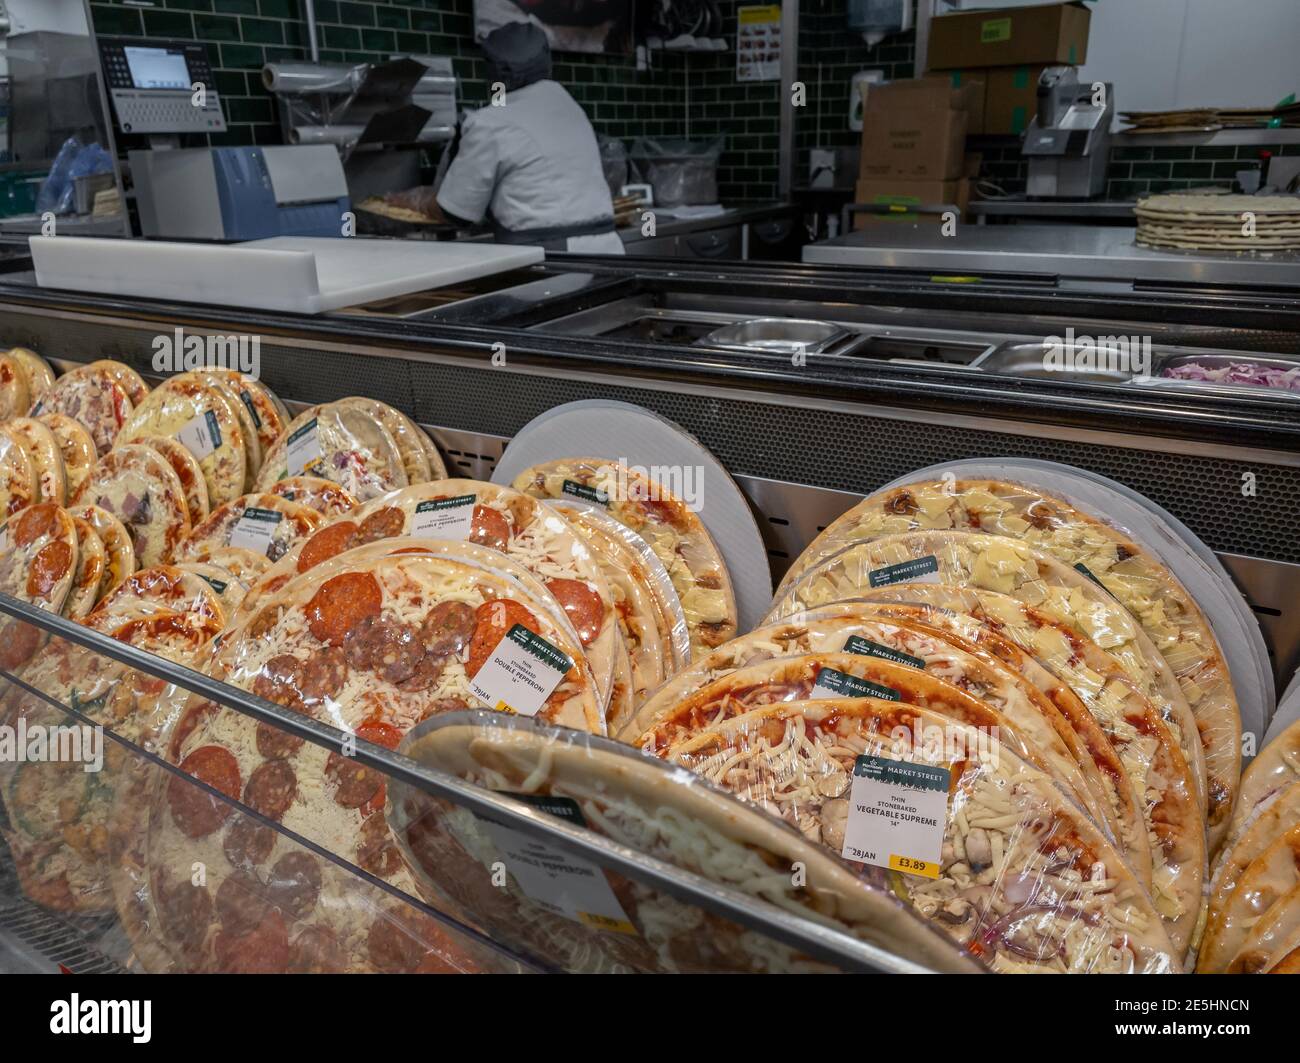 A display of freshly made pizzas in a supermarket. Stock Photo